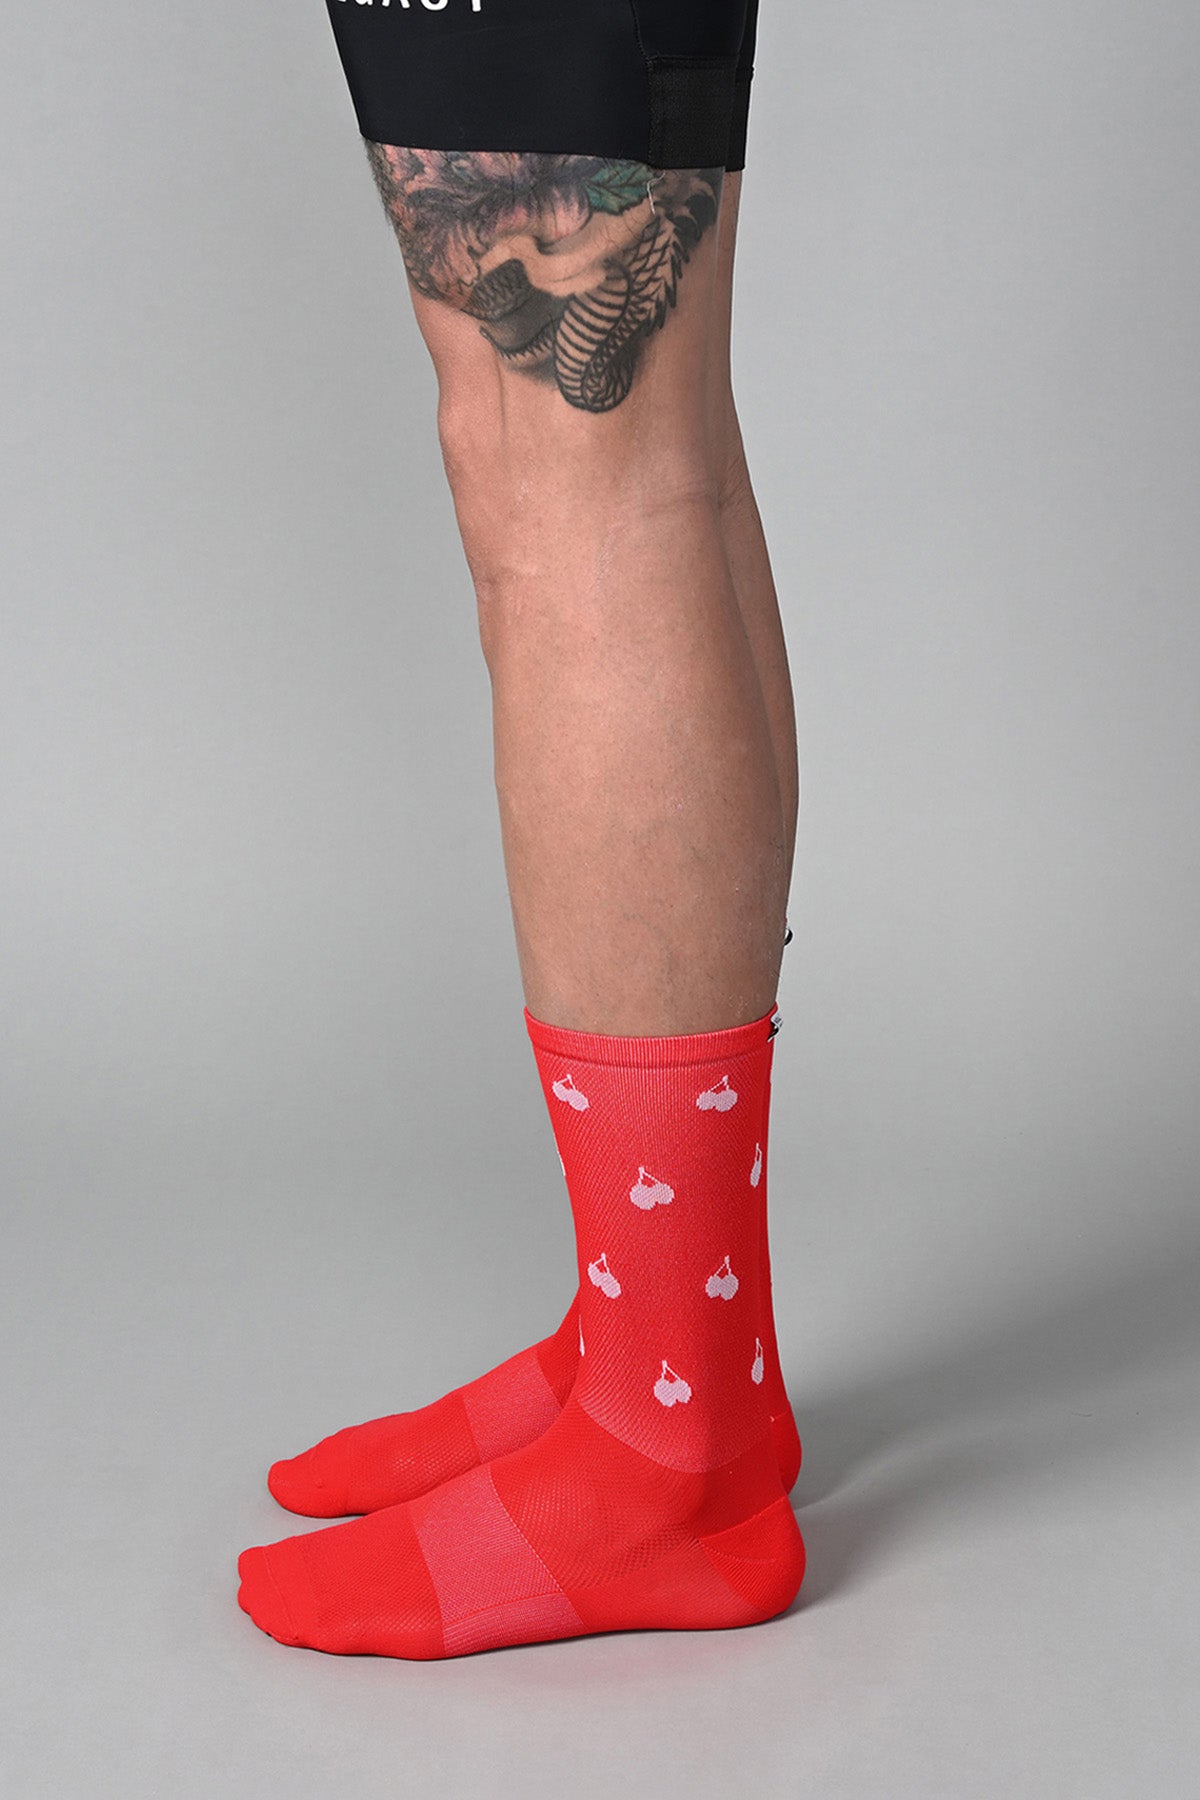 CHERRY - CANDY APPLE RED SIDE | BEST CYCLING SOCKS